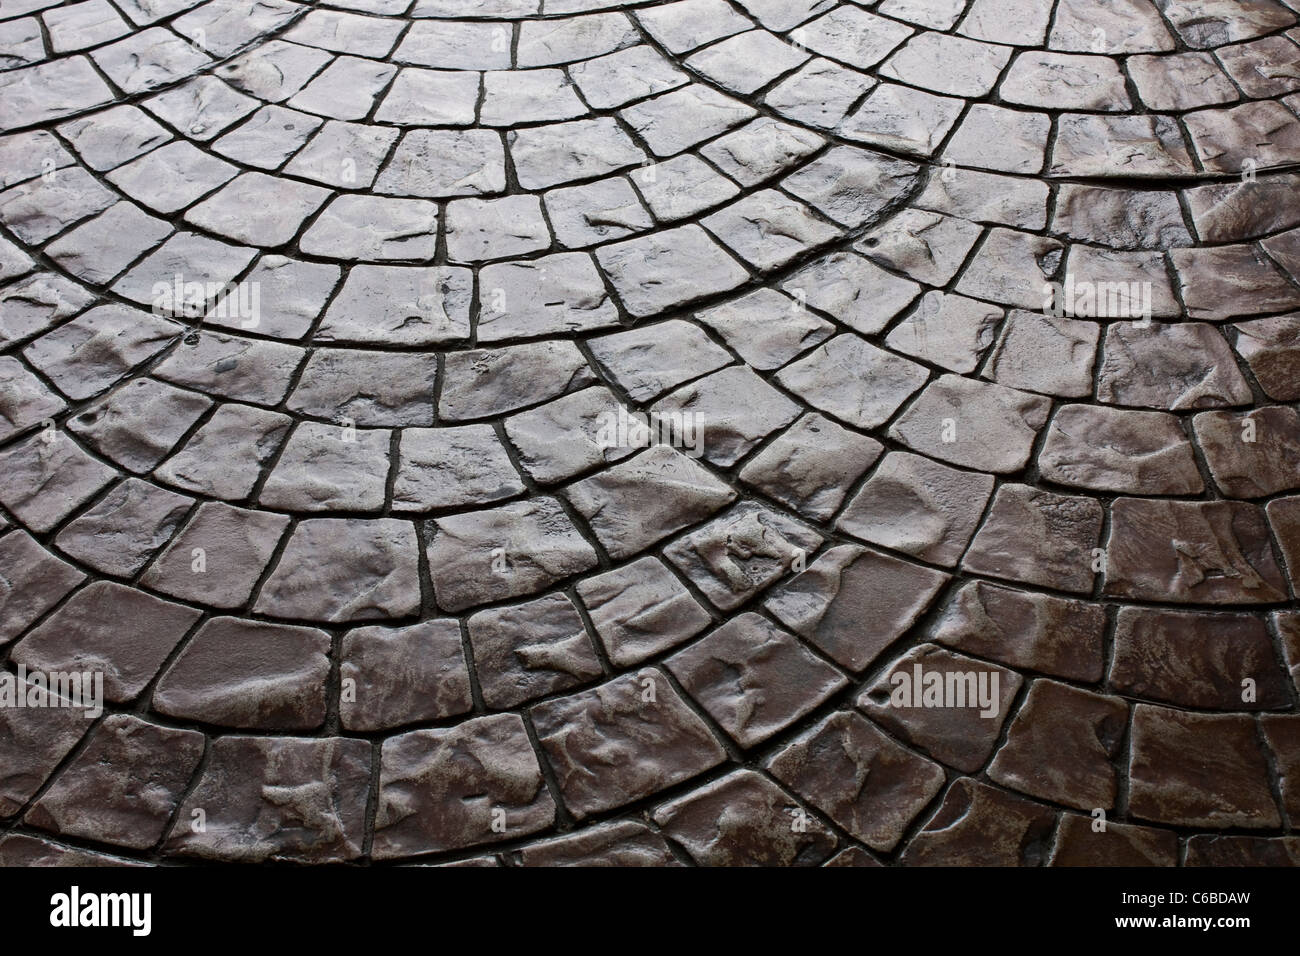 Dark rustic floor paving stones layed in a rounded pattern Stock Photo